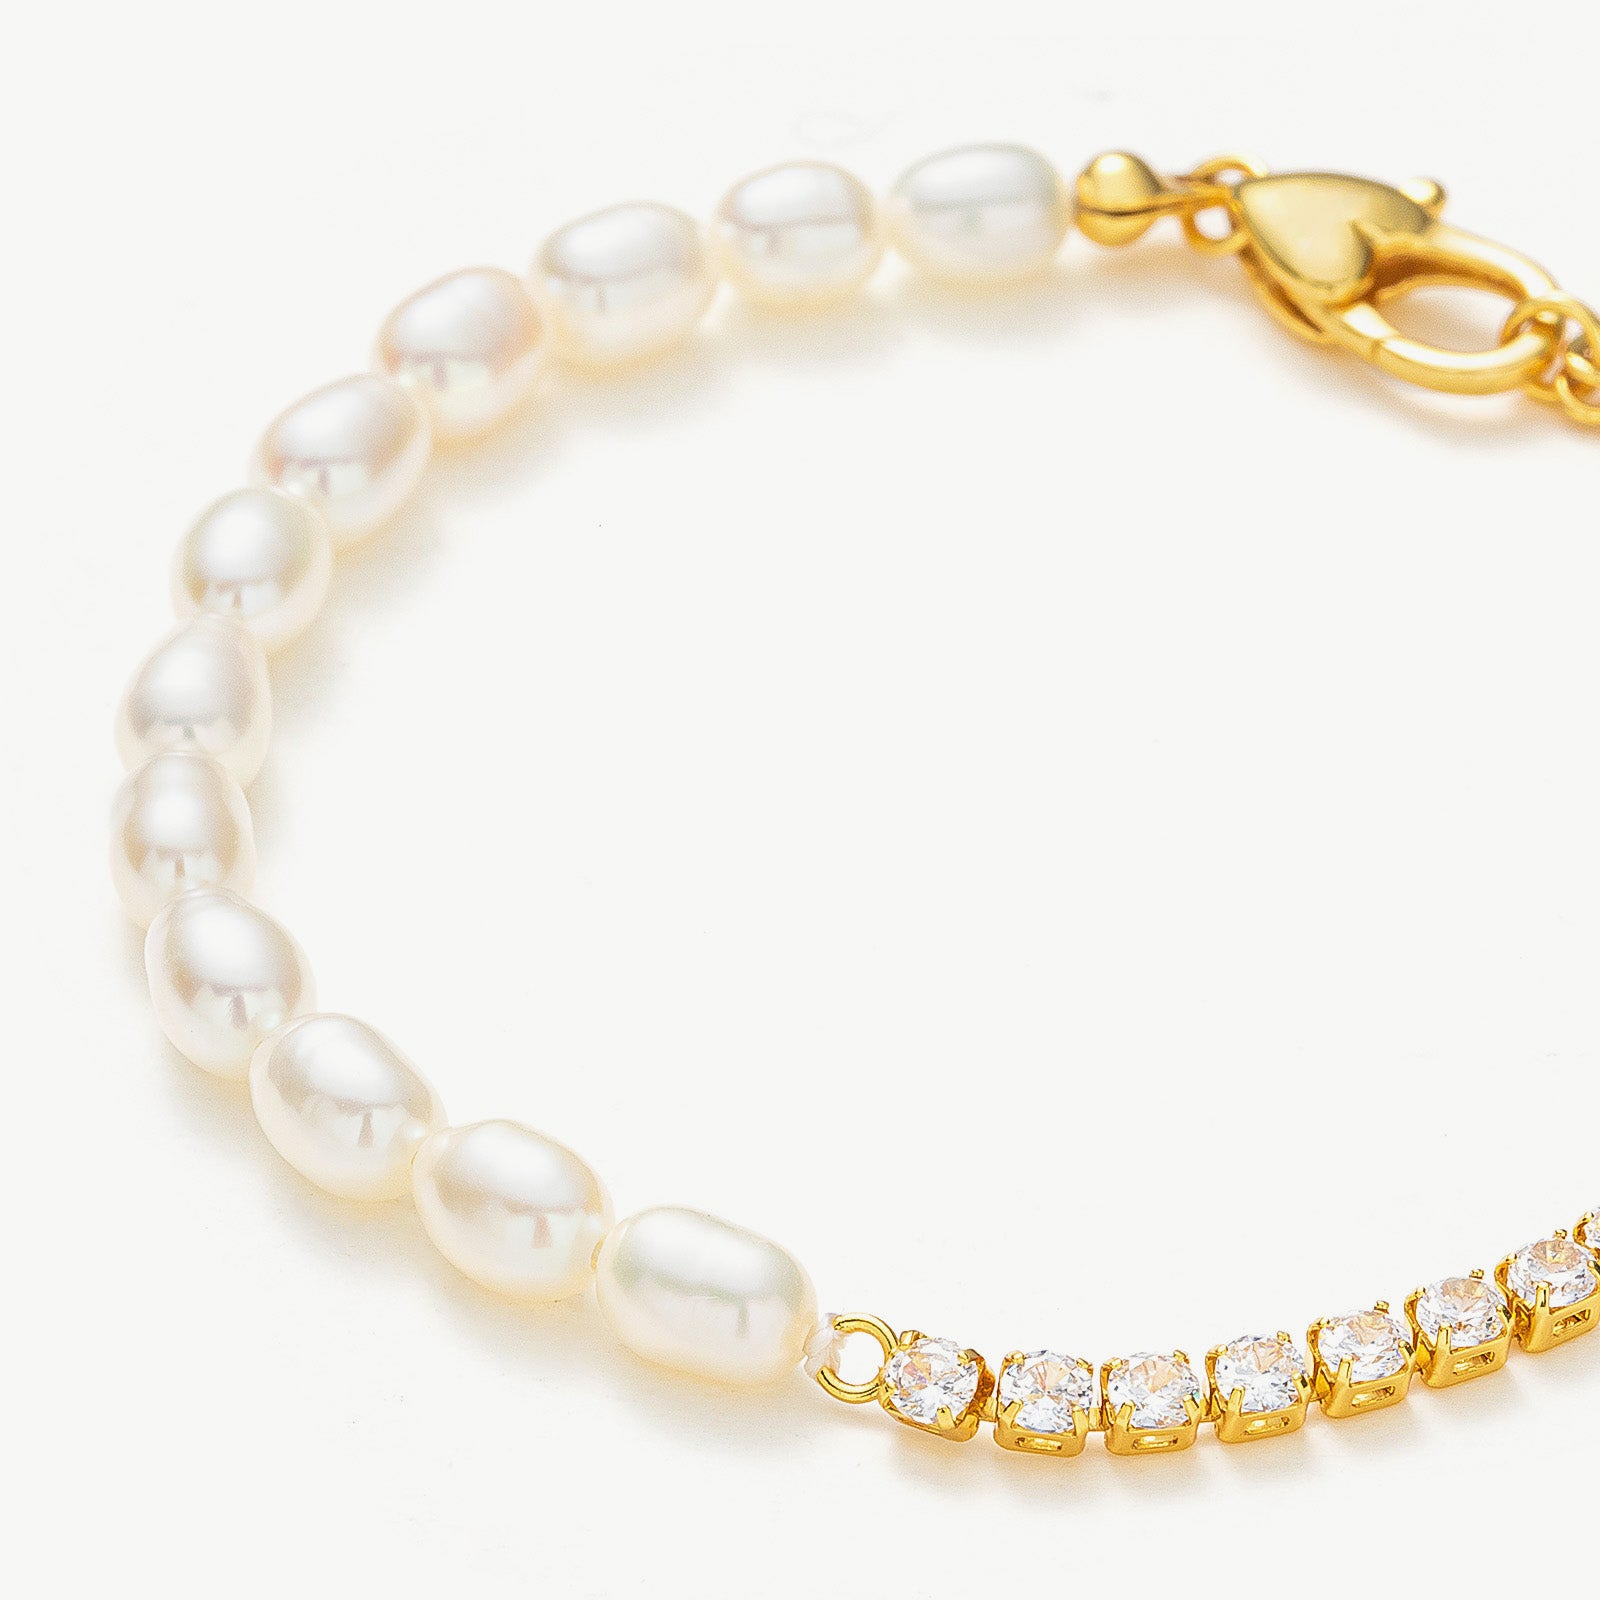 Pearl Crystal Chain Bracelet featuring a golden chain embellished with pearls and crystals, this bracelet radiates with the luminous glow of pearls and the sparkling brilliance of crystals, adding a touch of radiant beauty to your wrist.